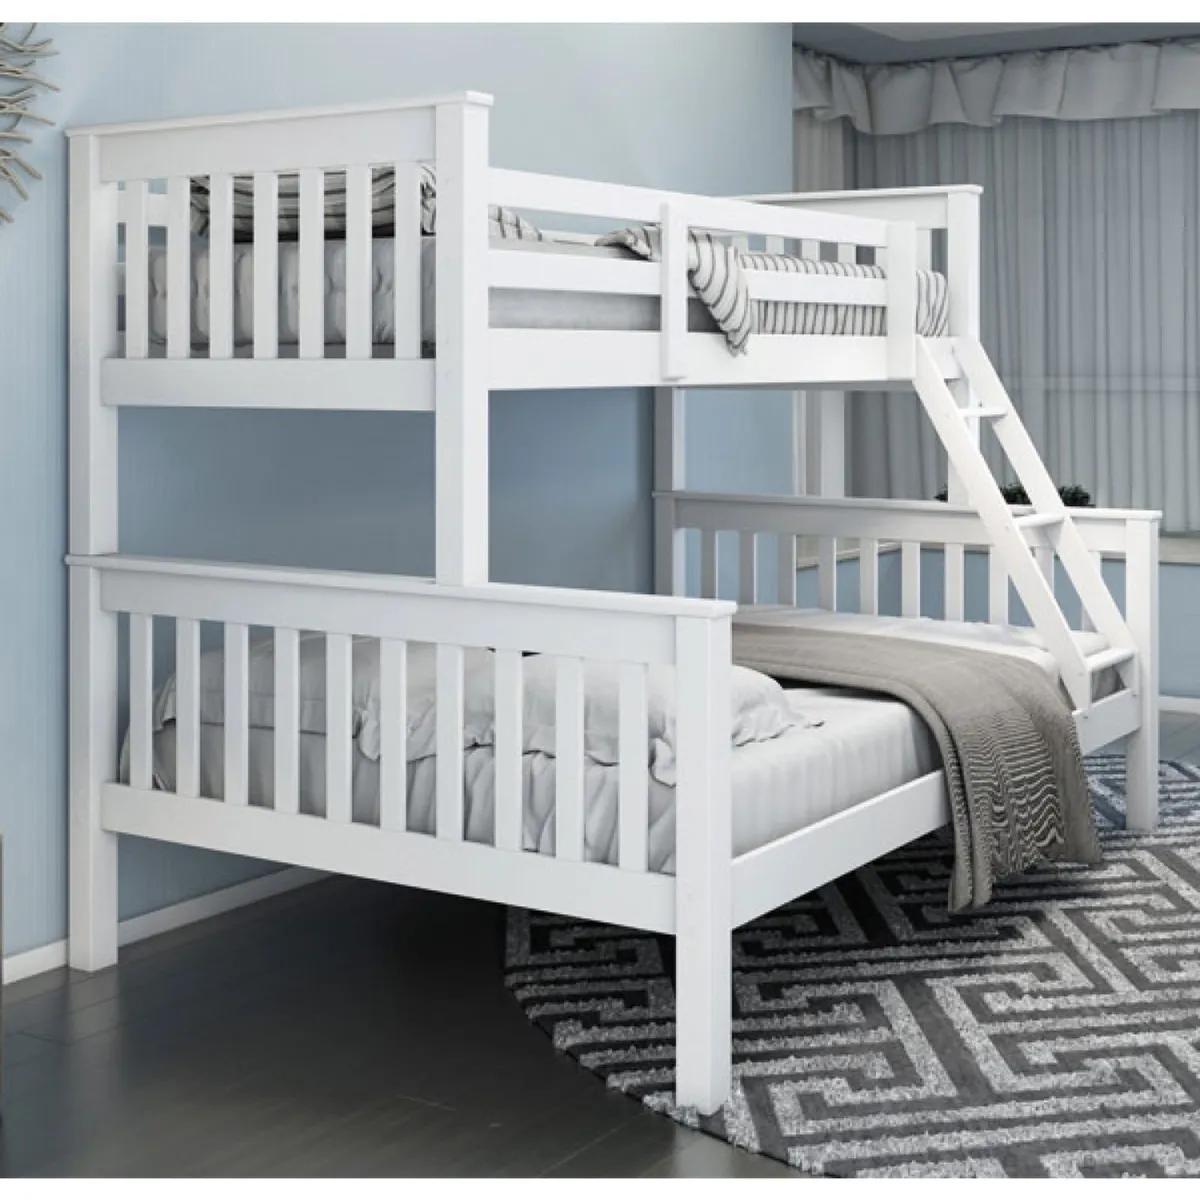 Main picture triple bunk bed yes 445€ - Image 1